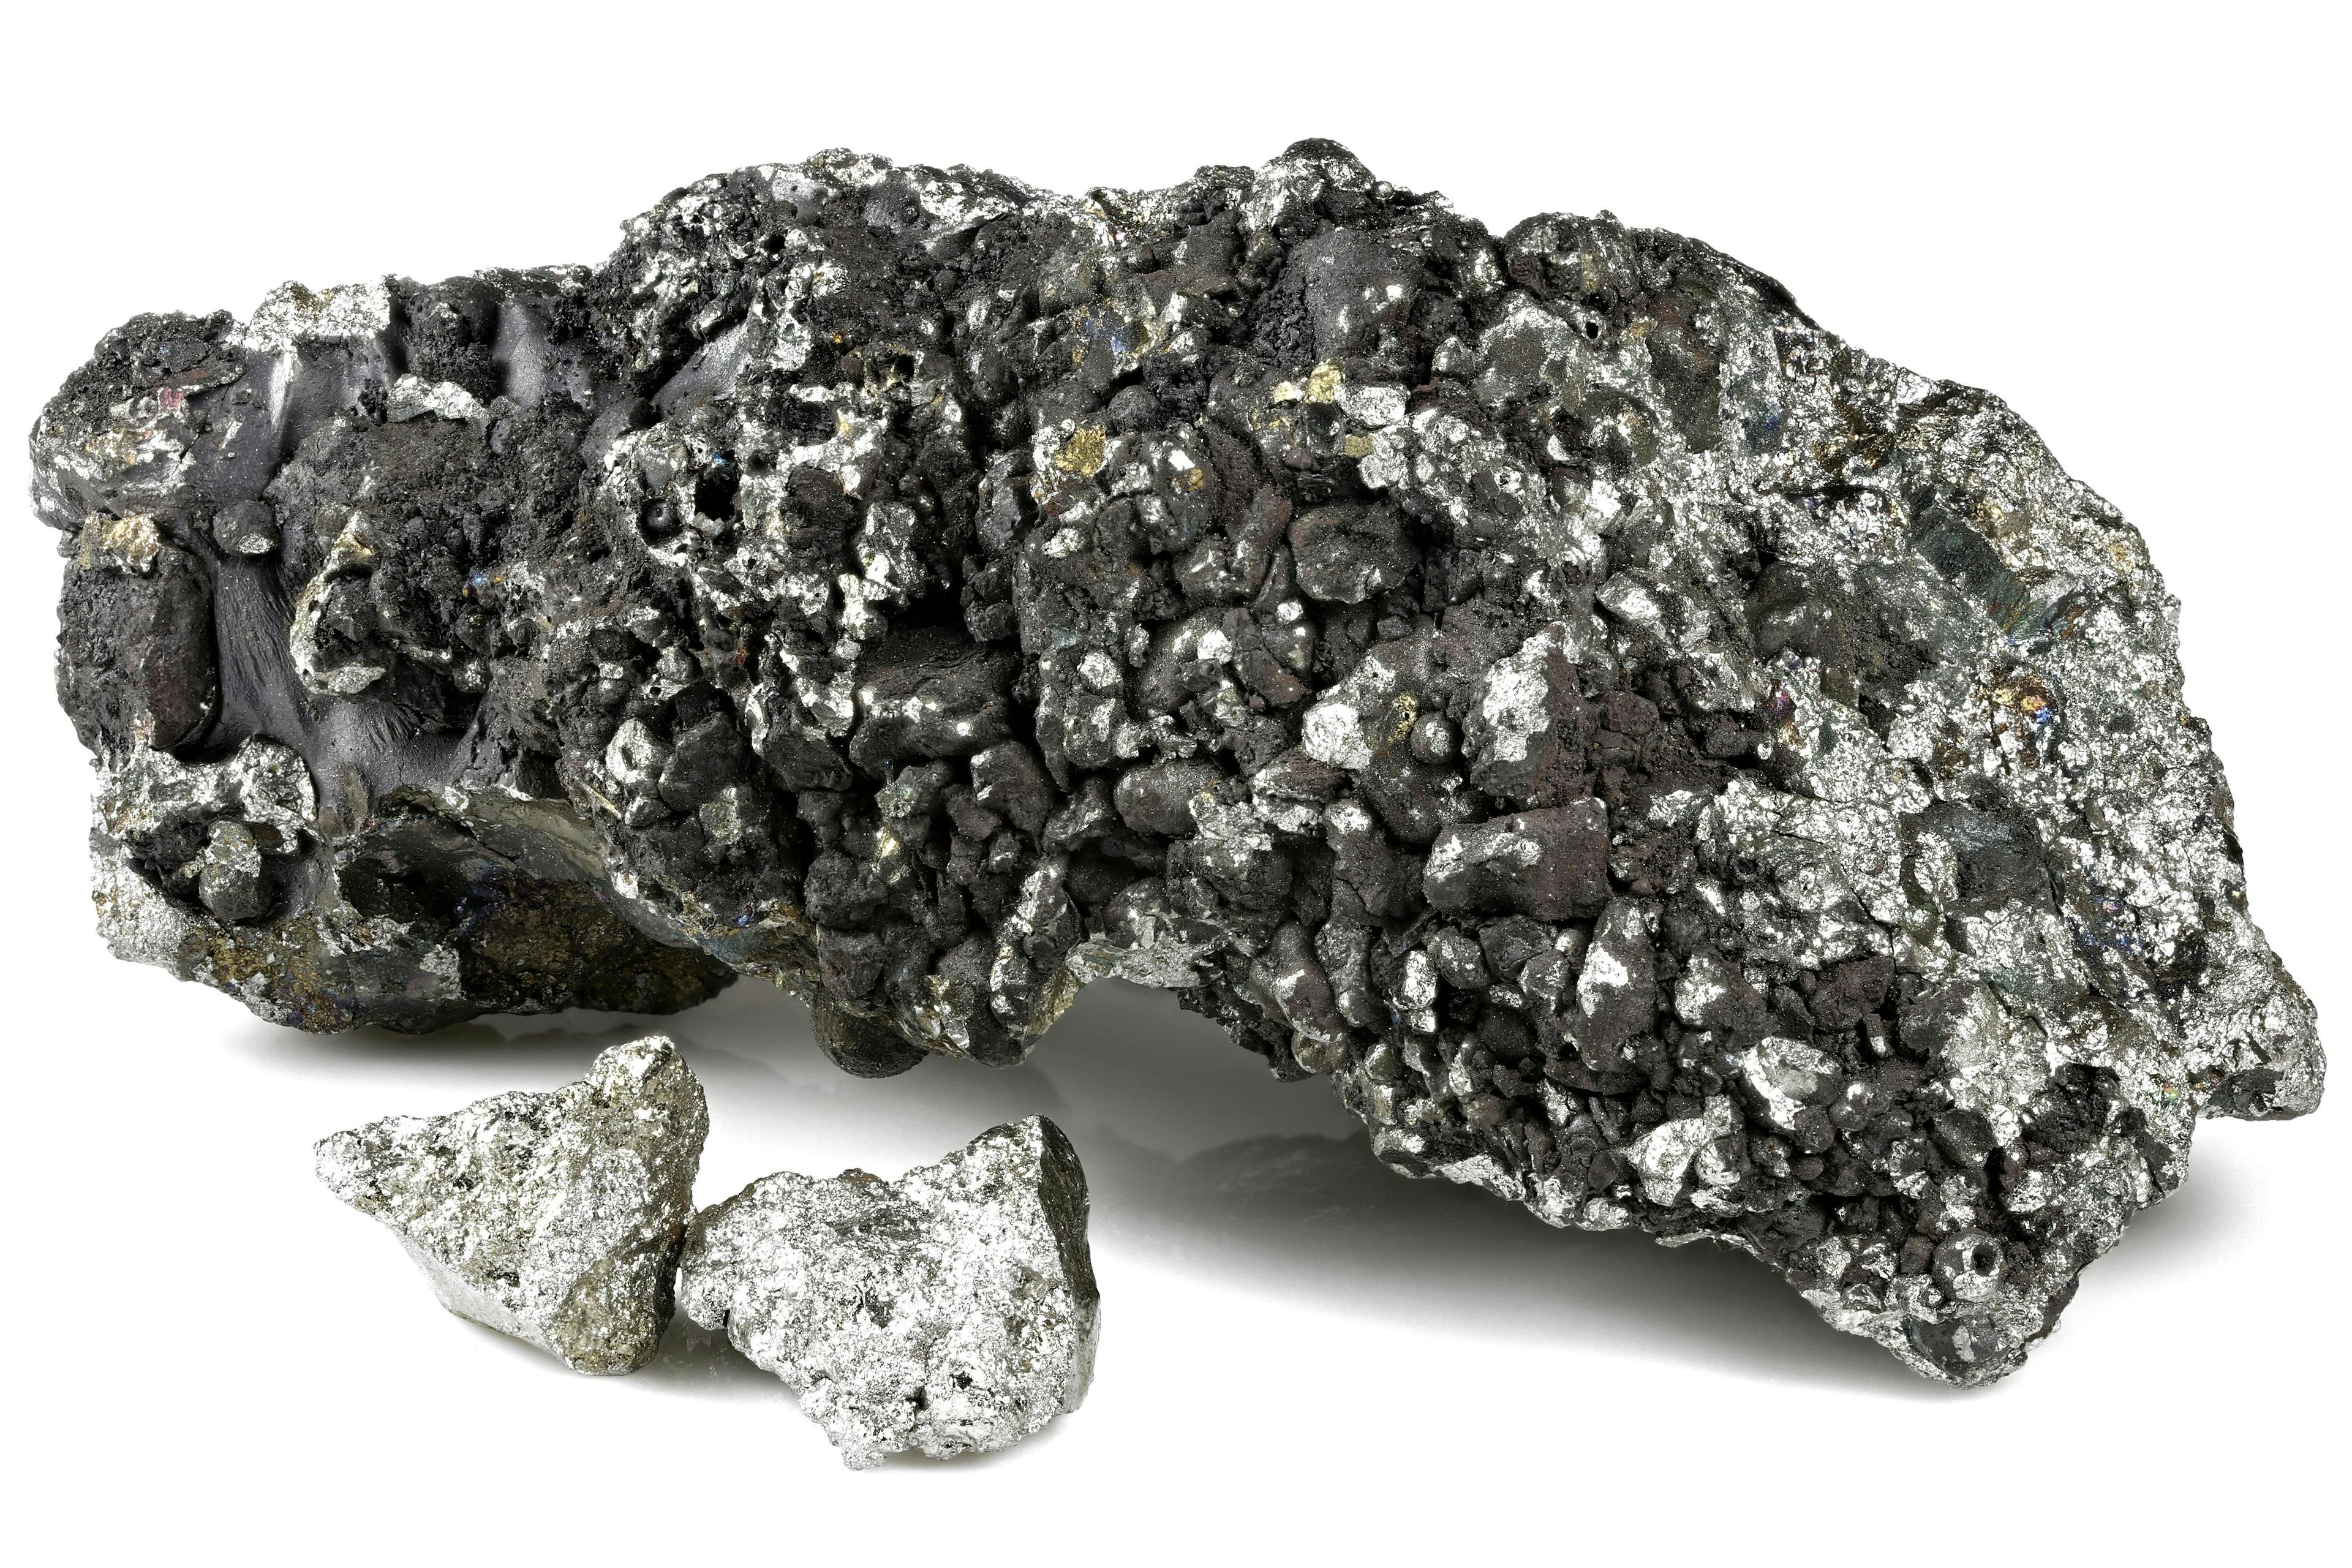 99.7% fine manganese isolated on white background | Image Credit: © Björn Wylezich - stock.adobe.com